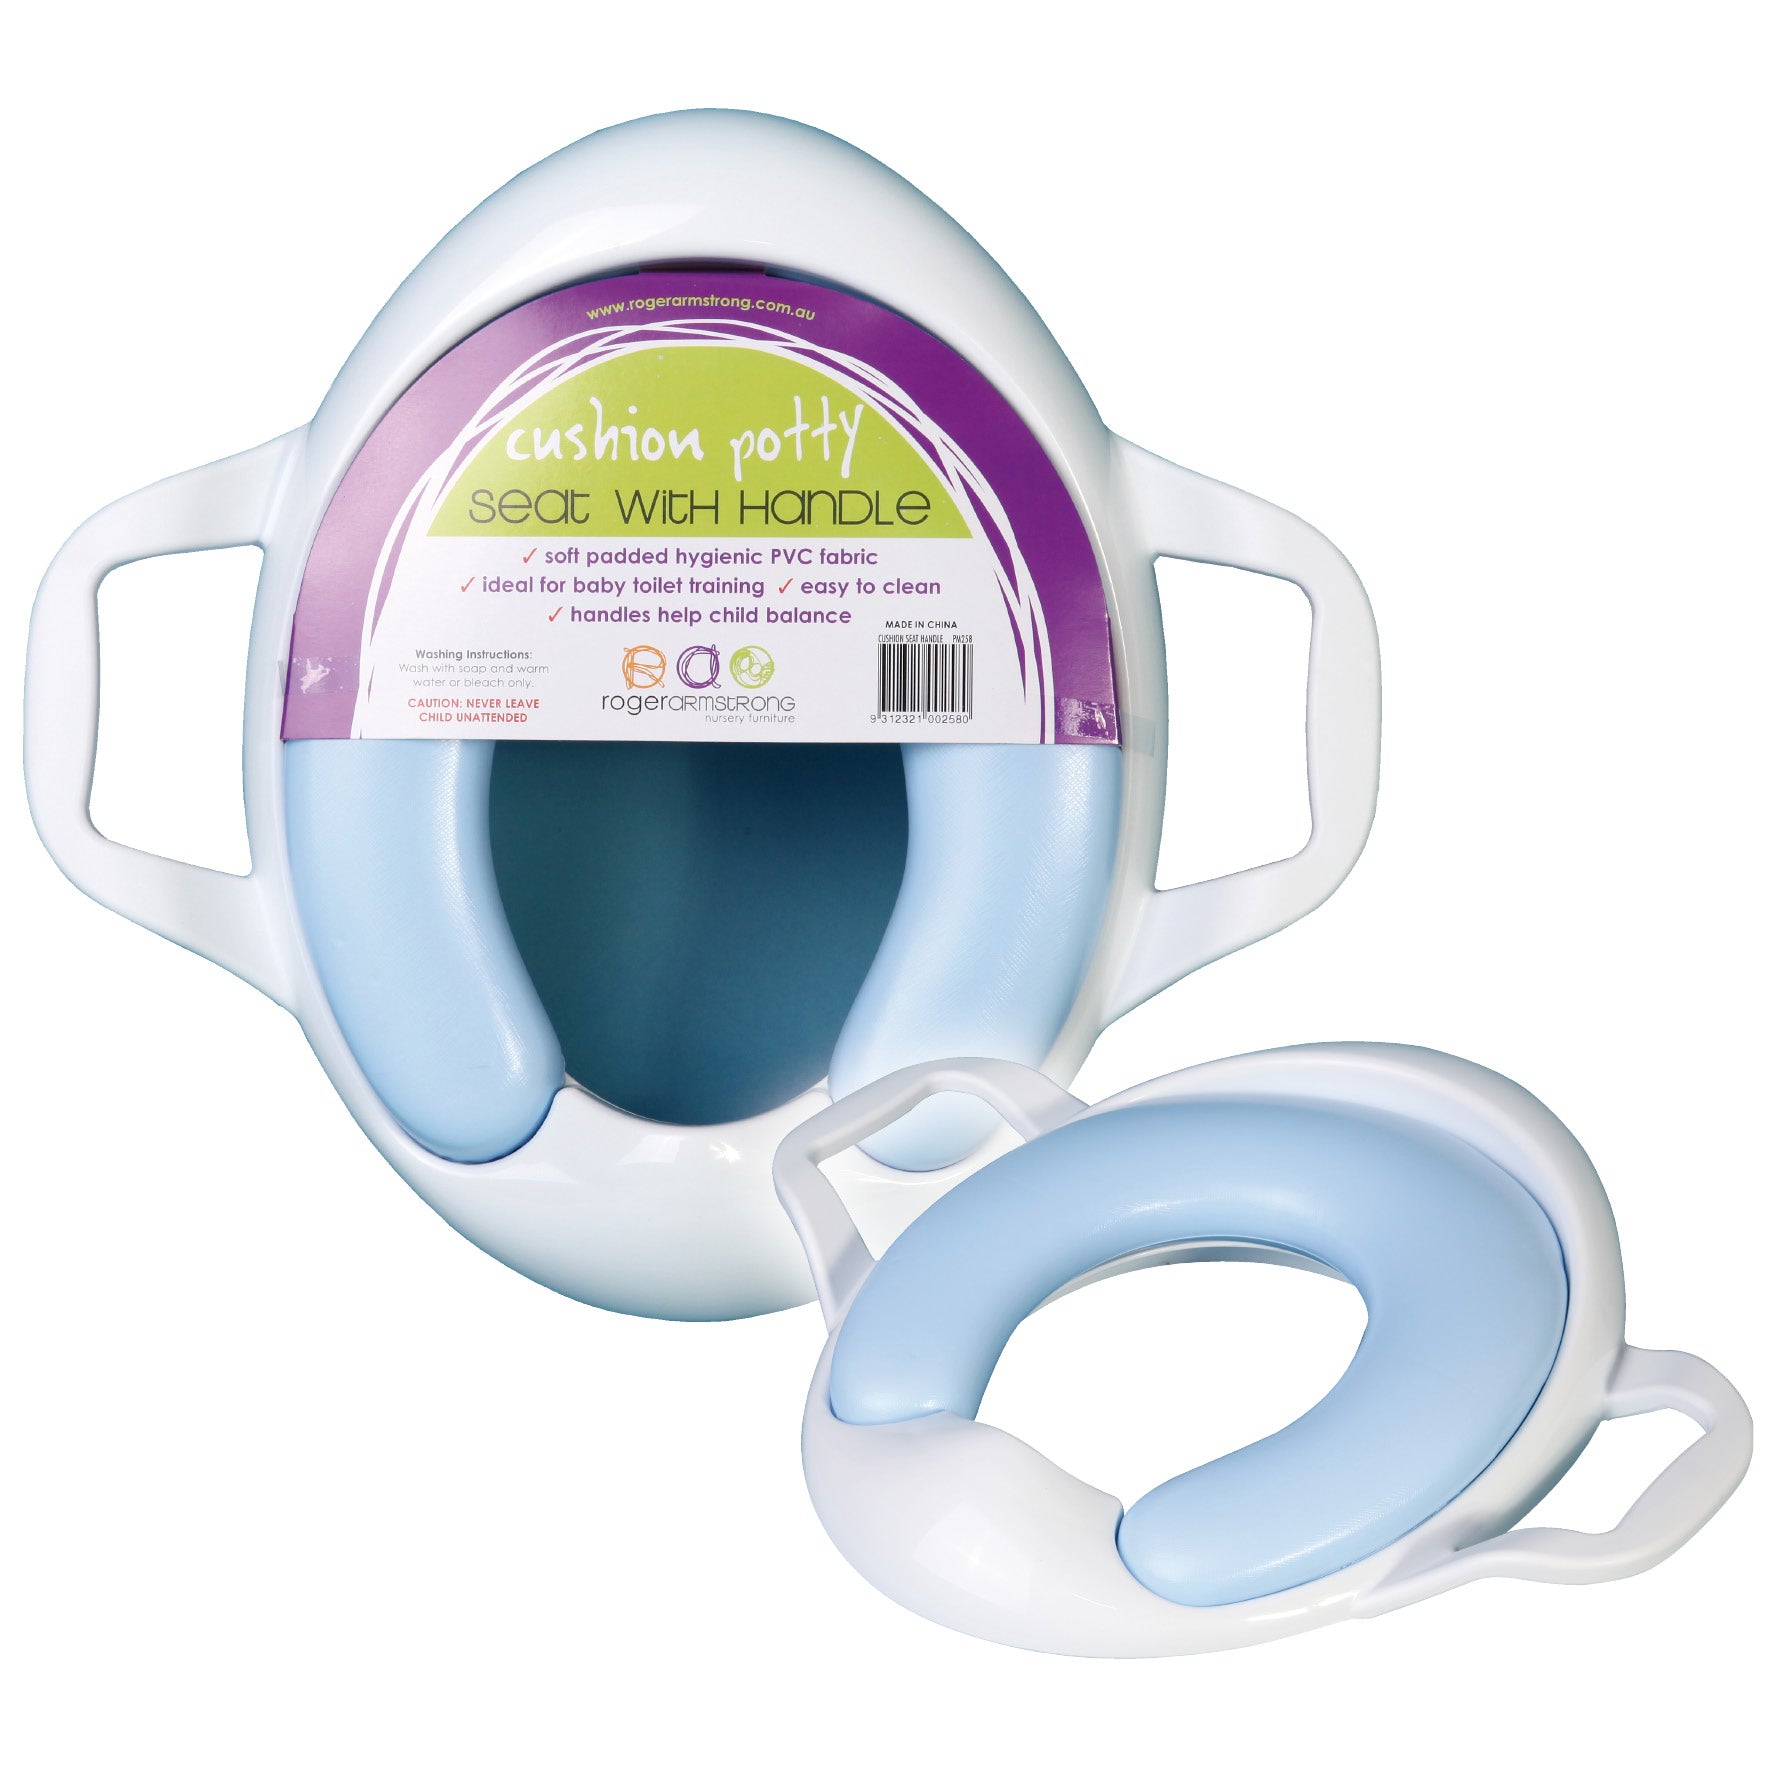 Cushion Potty Toilet Seat with handle